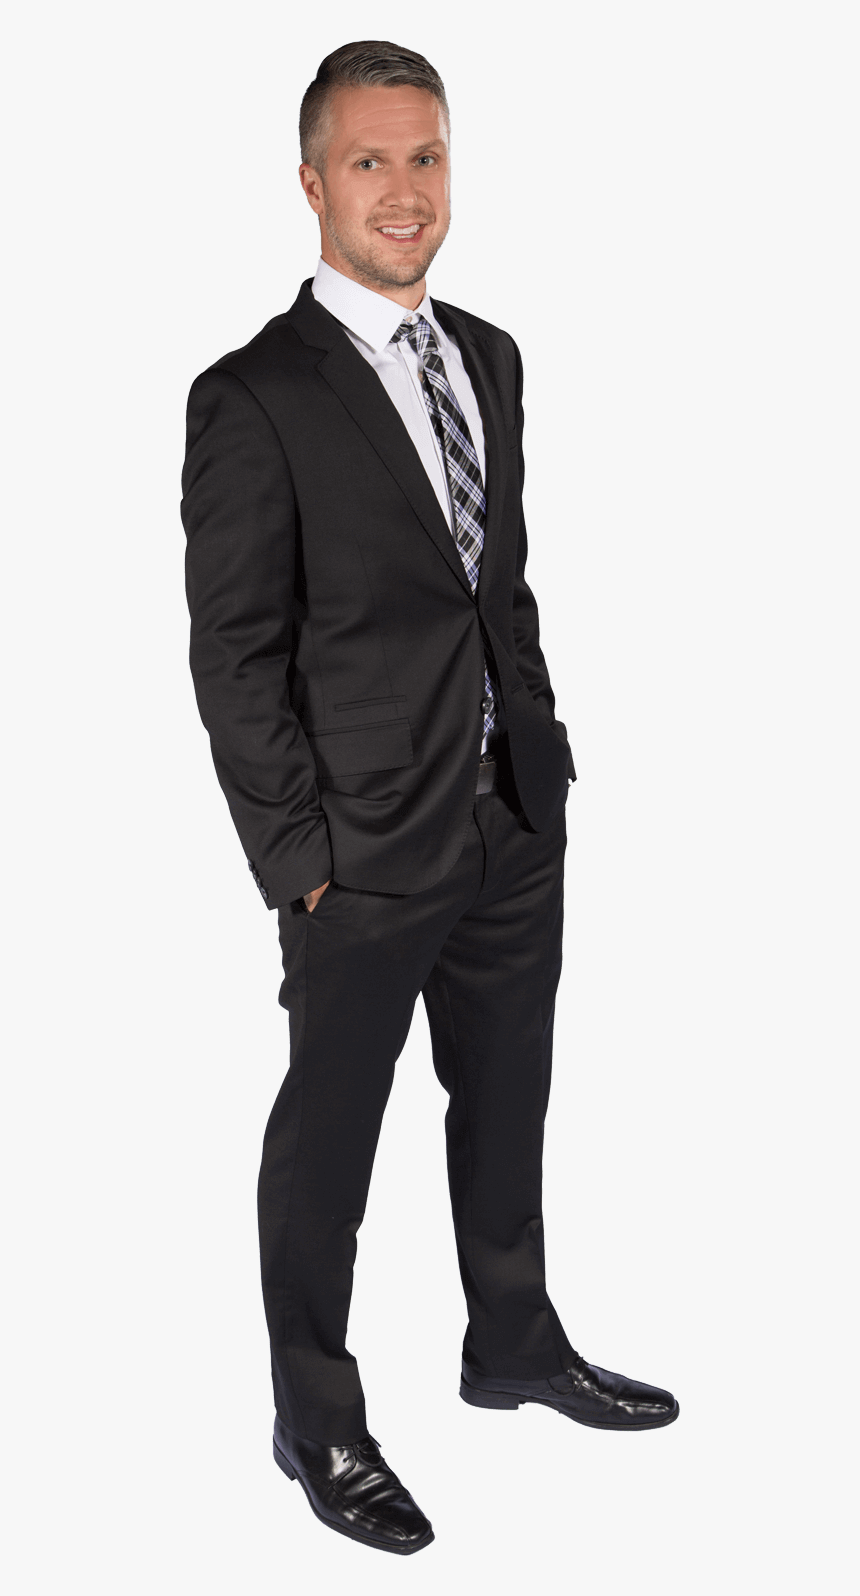 Real Estate Agent Full Body, HD Png Download, Free Download